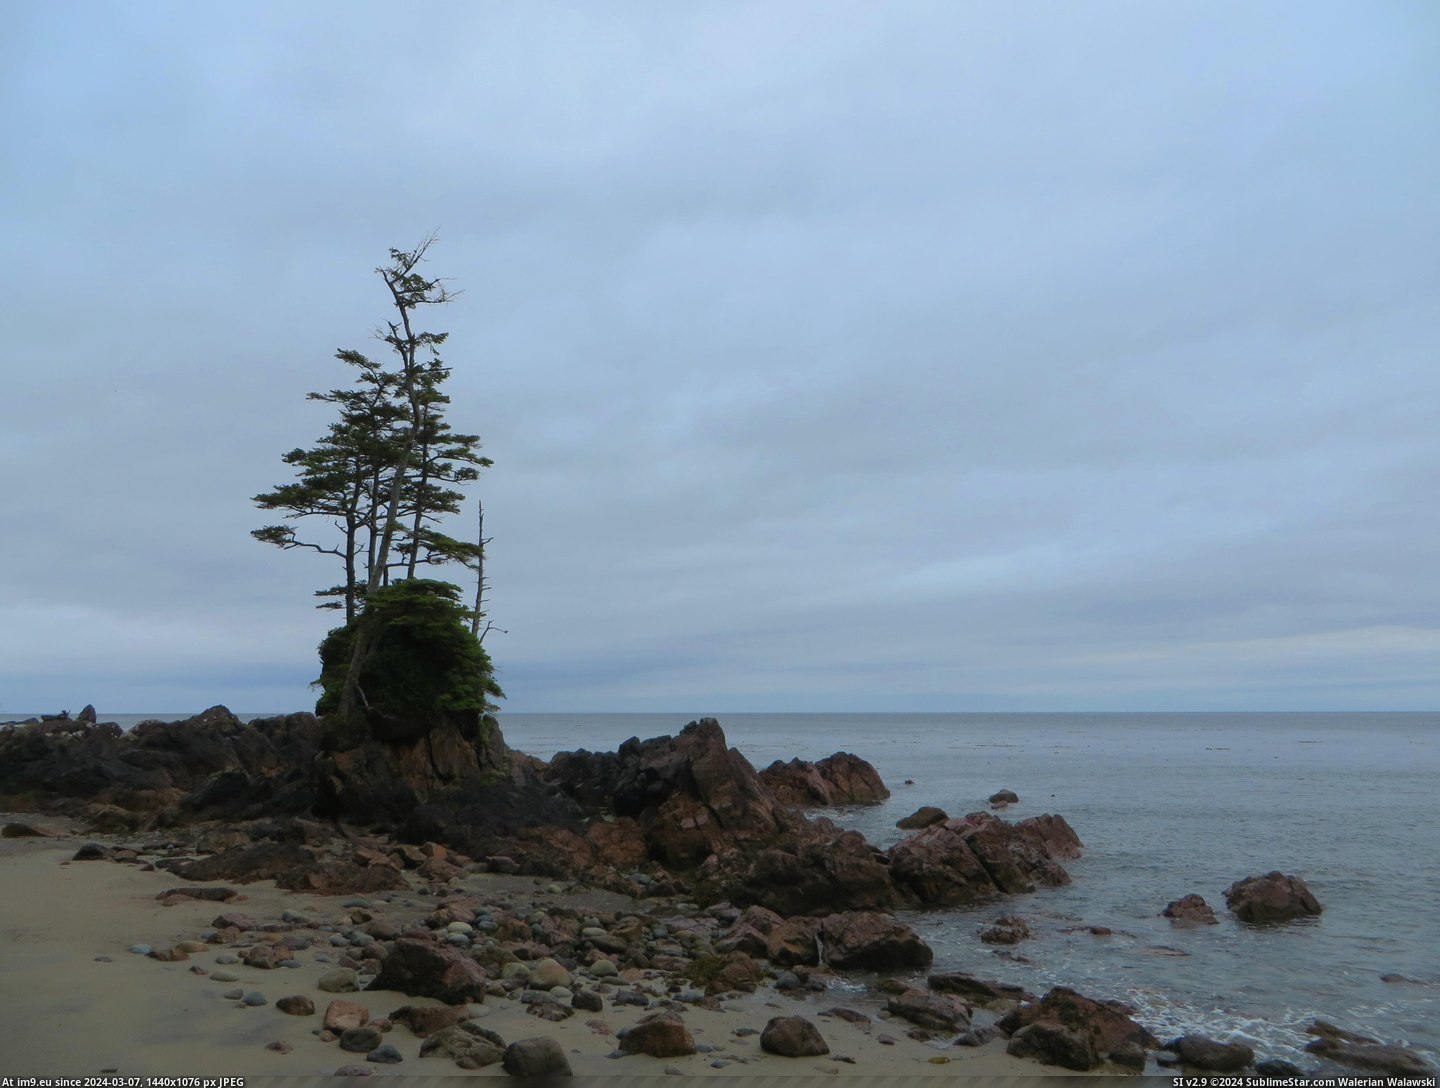 #Rock #Trees #Ocean #Storm #Facing #Spruce #Pillar #Pacific #Cape #Scott #Lone [Earthporn] Storm battered Spruce trees on a lone pillar of rock facing the open Pacific ocean. Cape Scott, BC.  [3967x2975] Pic. (Изображение из альбом My r/EARTHPORN favs))